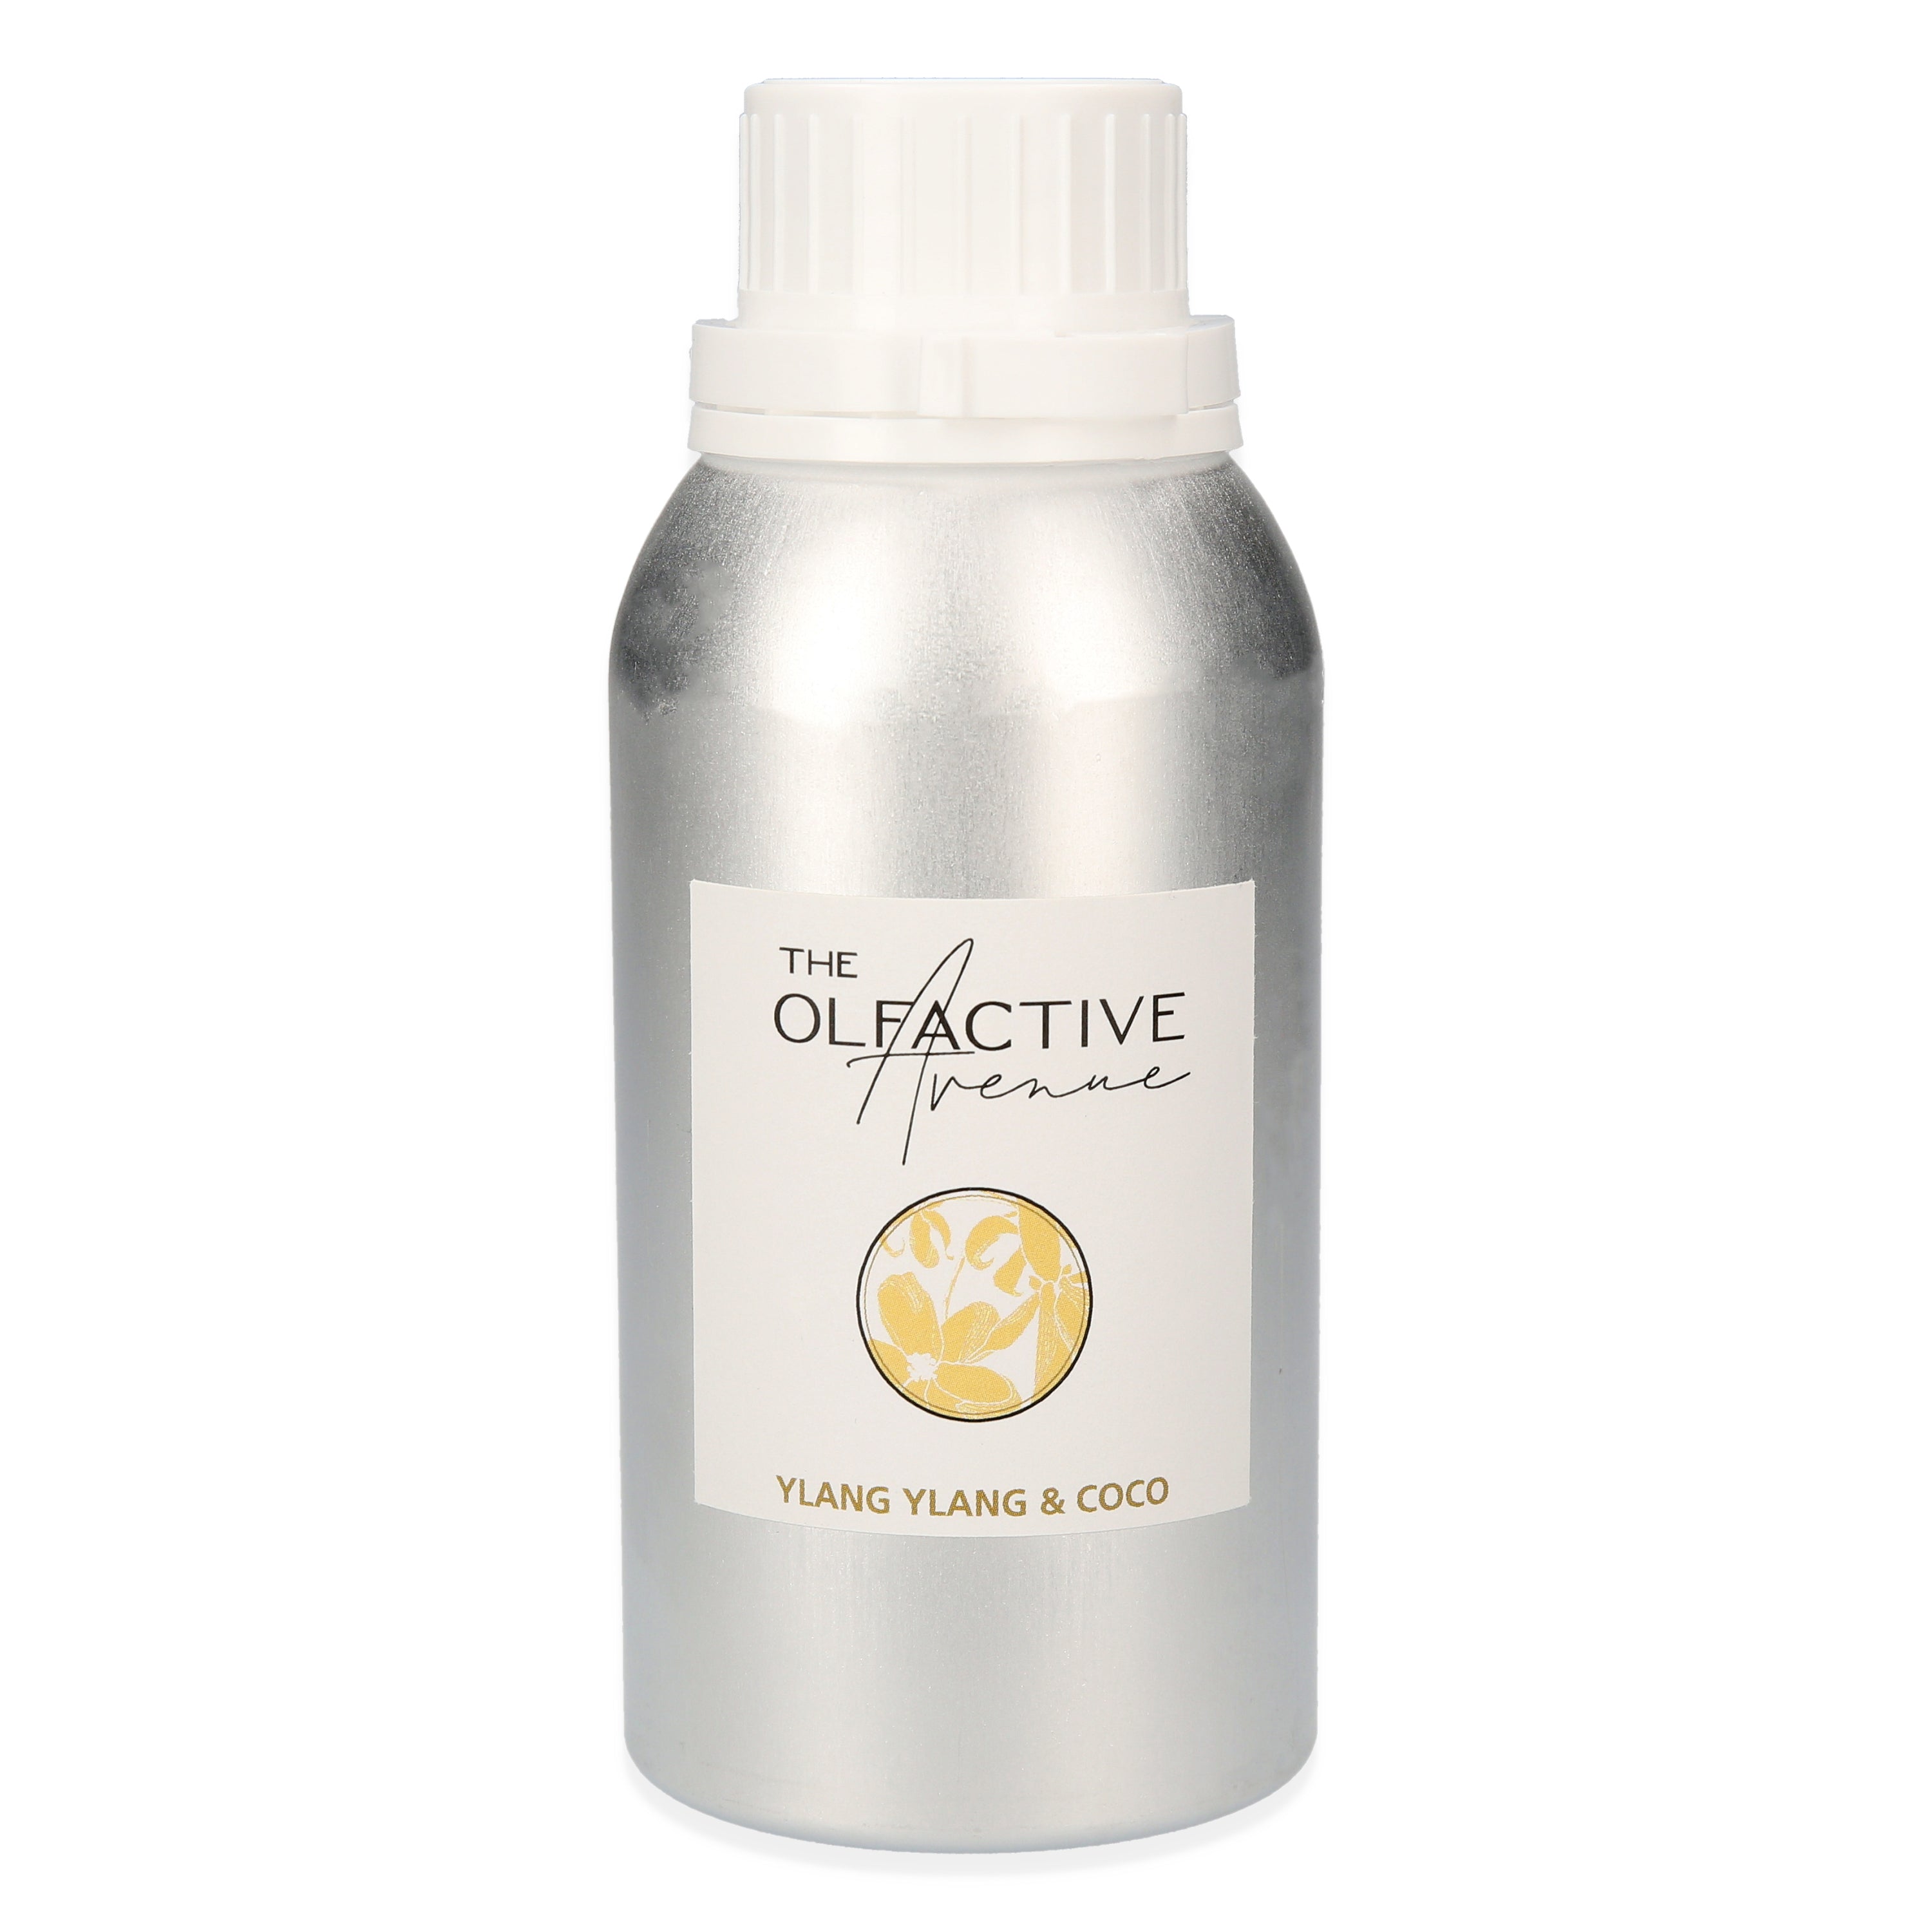 YLANG YLANG & COCO REFILL - The Olfactive Avenue